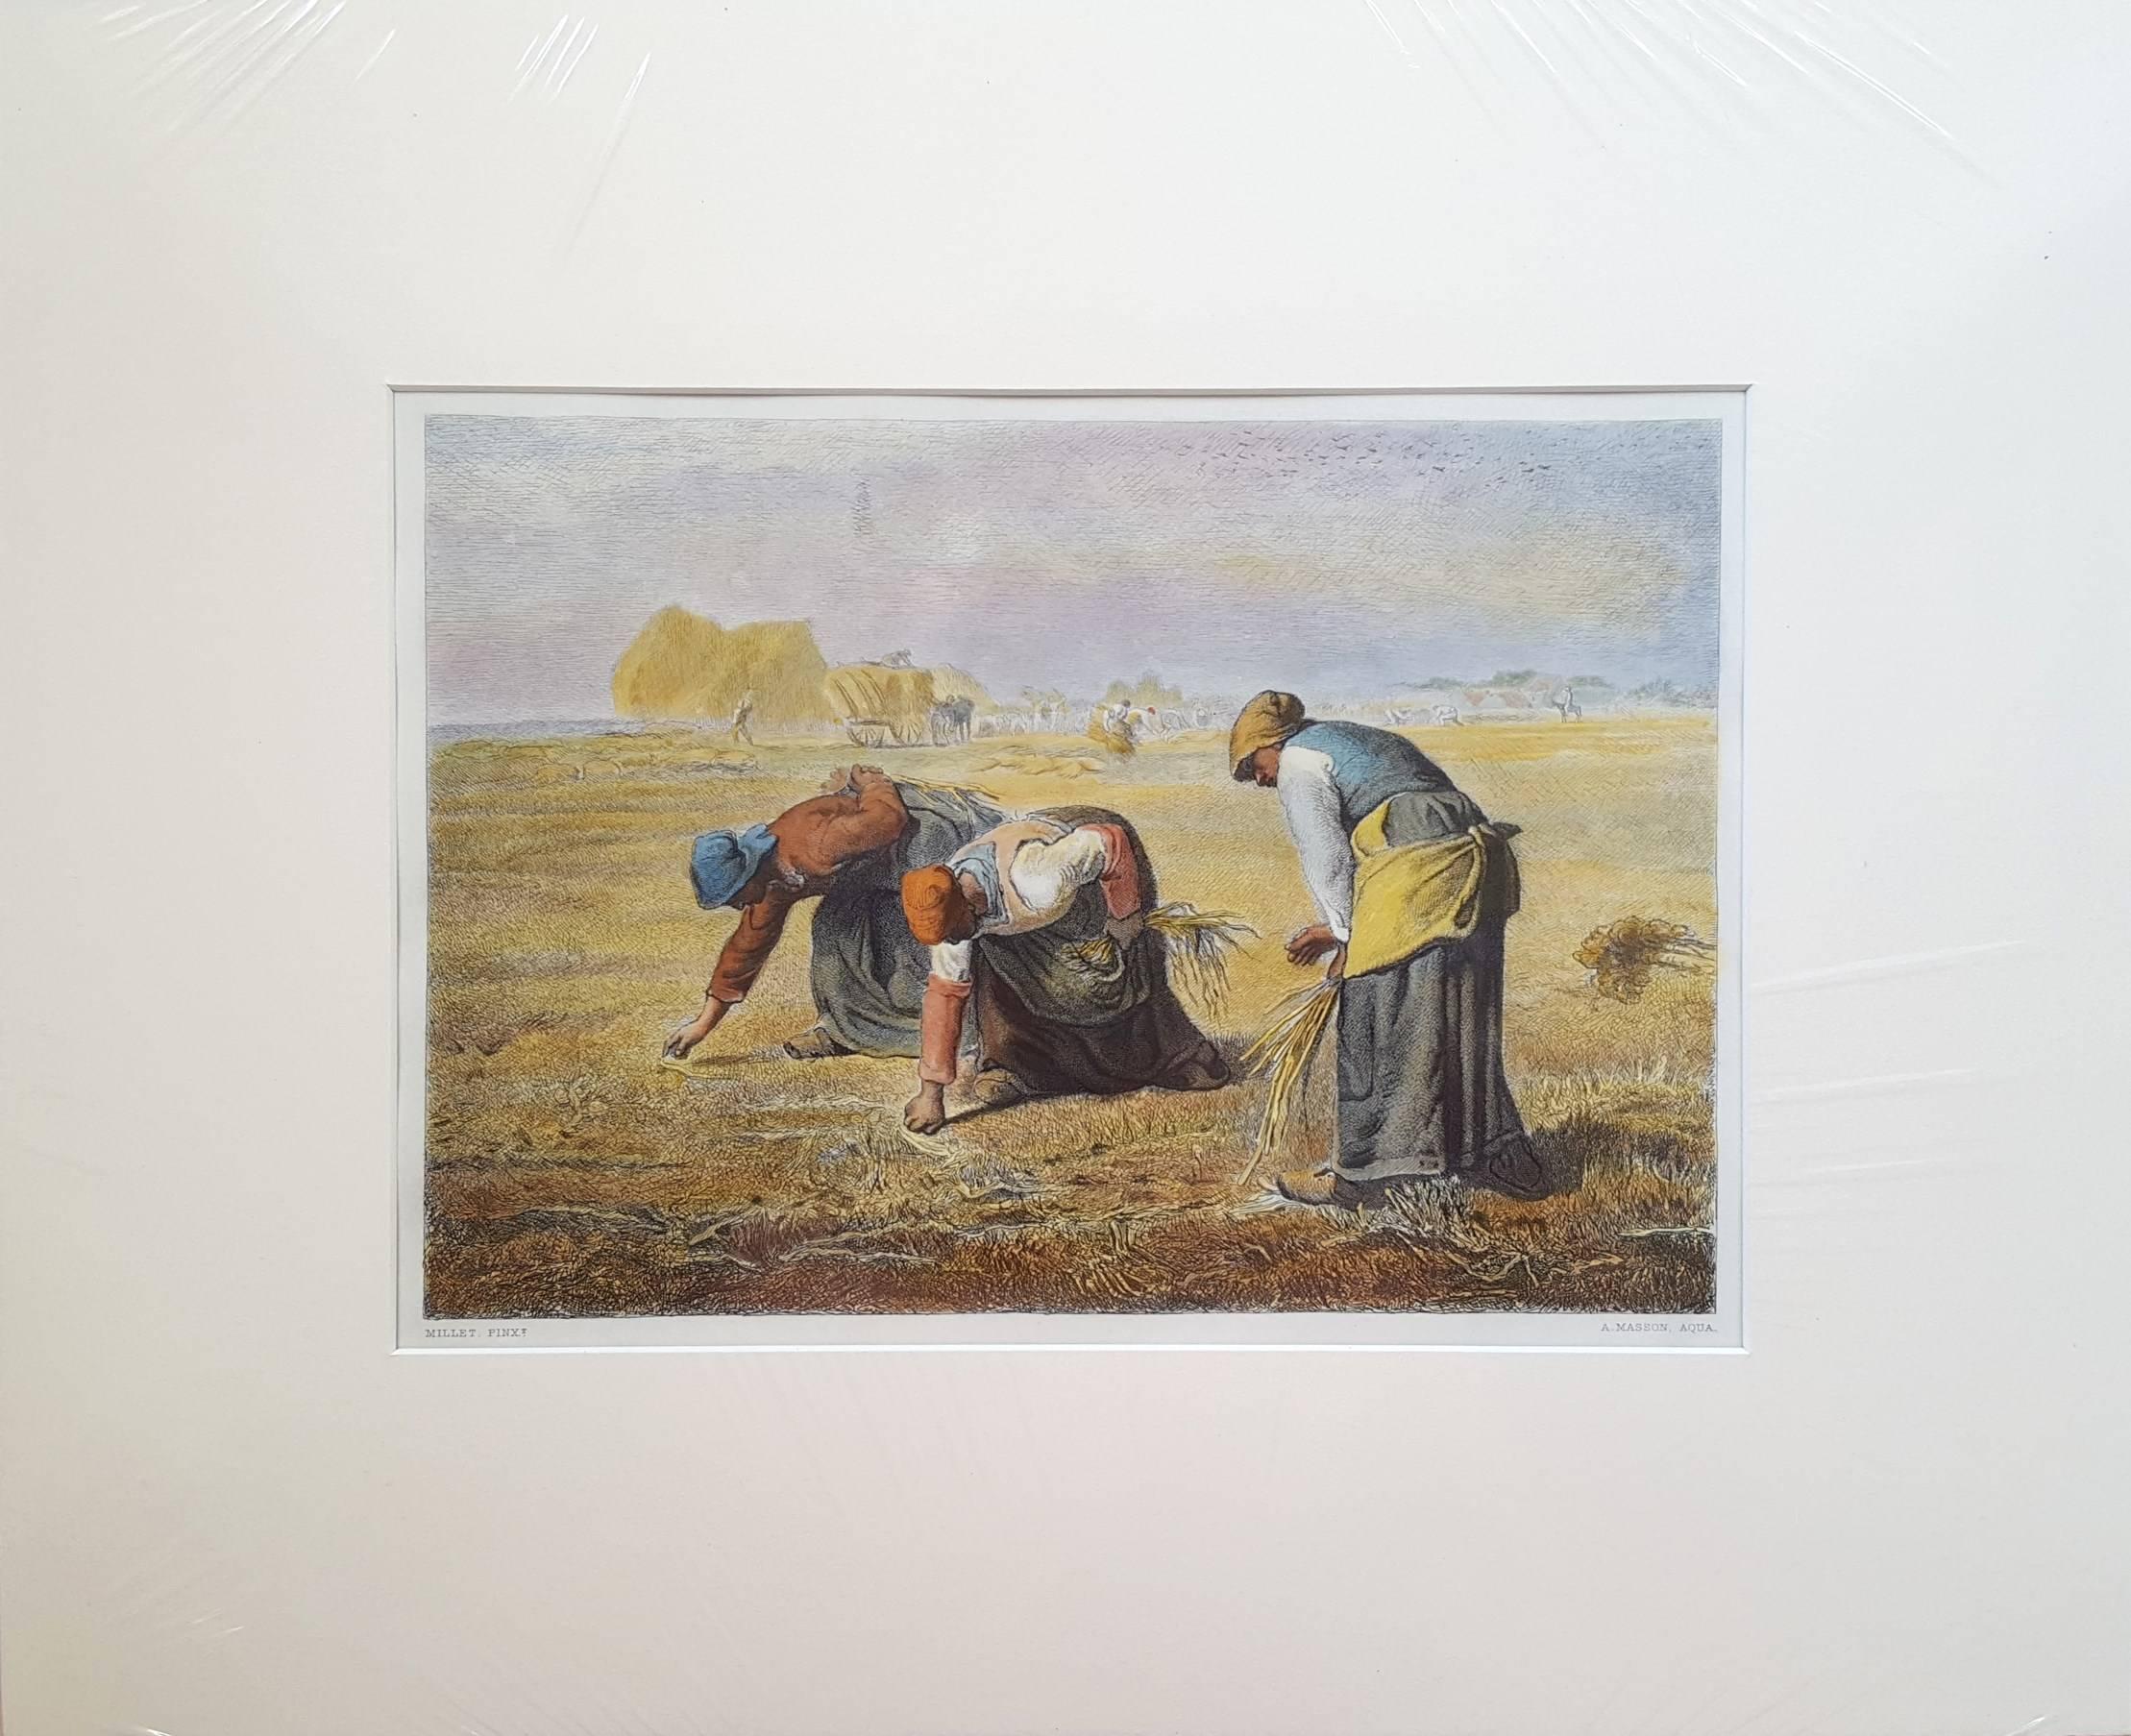 Gleaning in Belgium - Print by (after) Jean François Millet